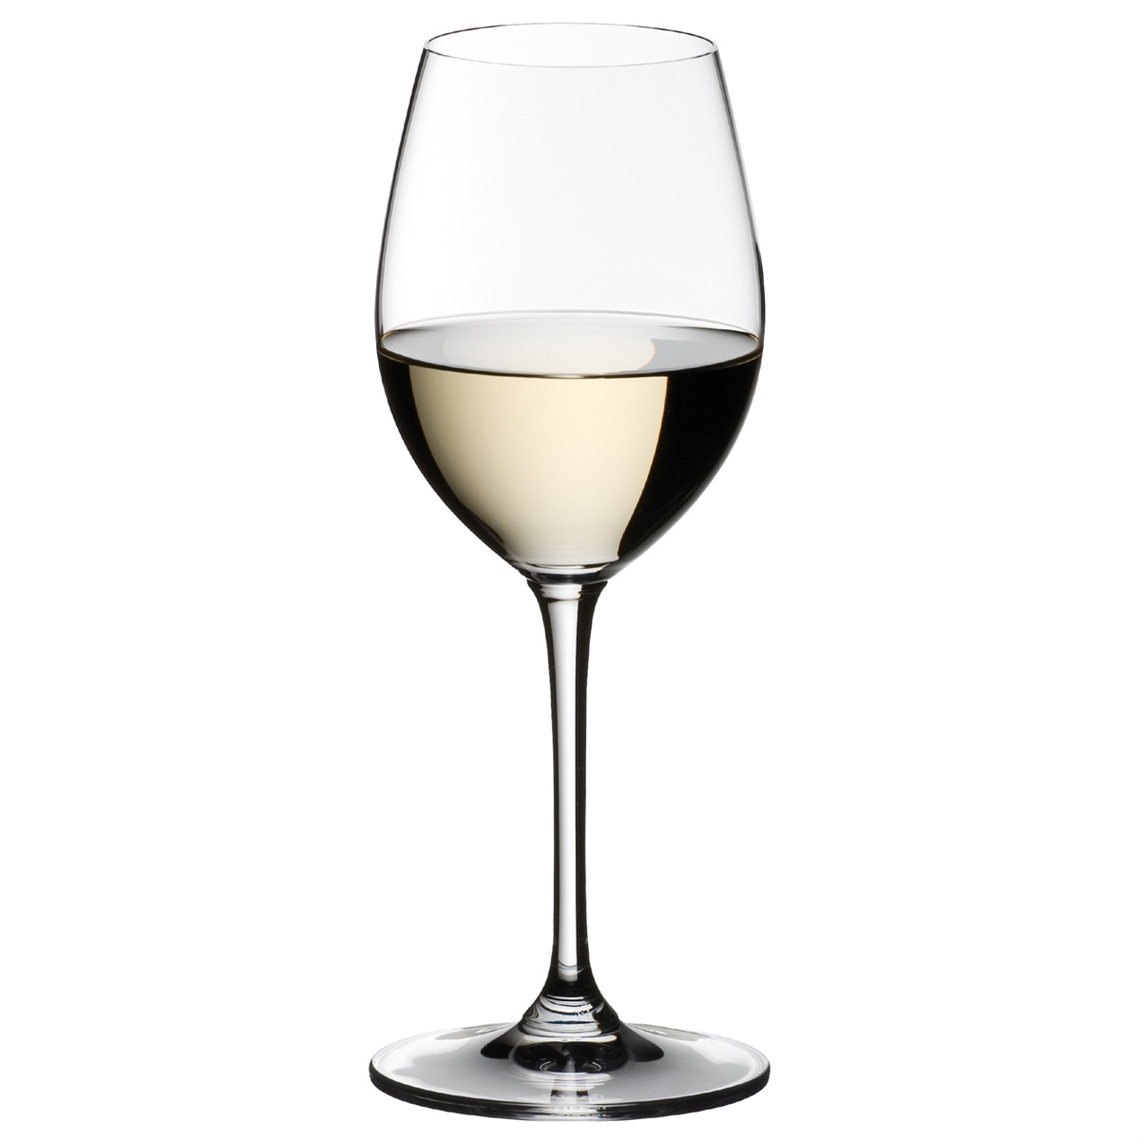 View more how to taste wine - a complete guide  from our Dessert Wine Glasses range